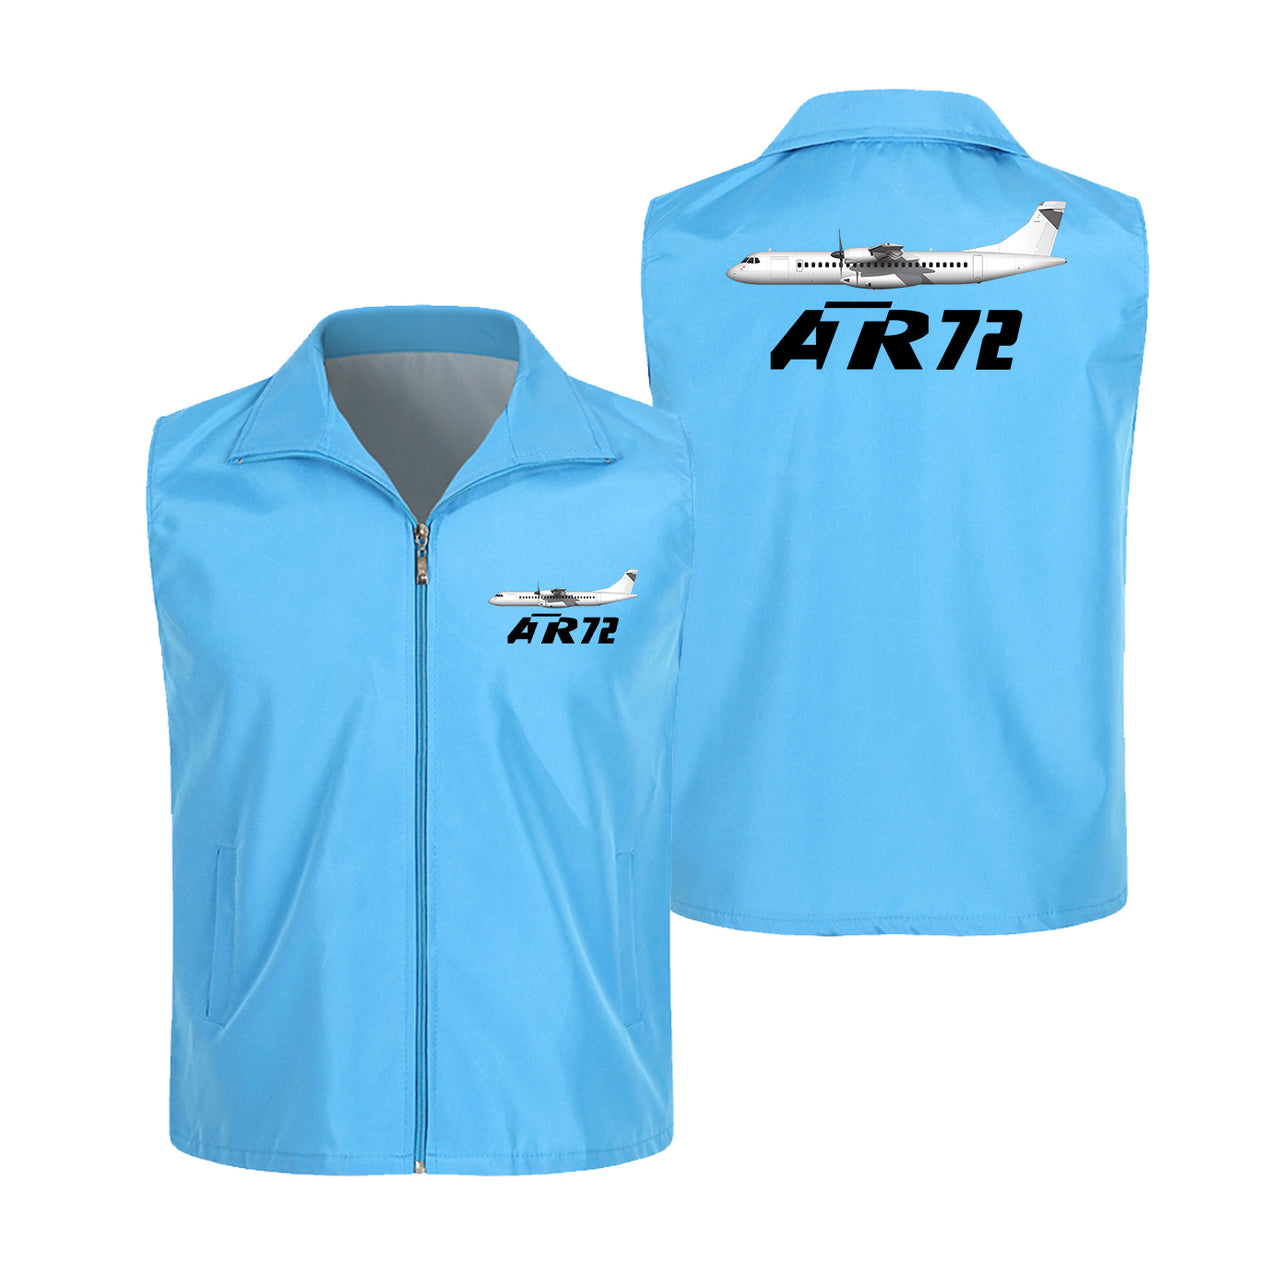 The ATR72 Designed Thin Style Vests